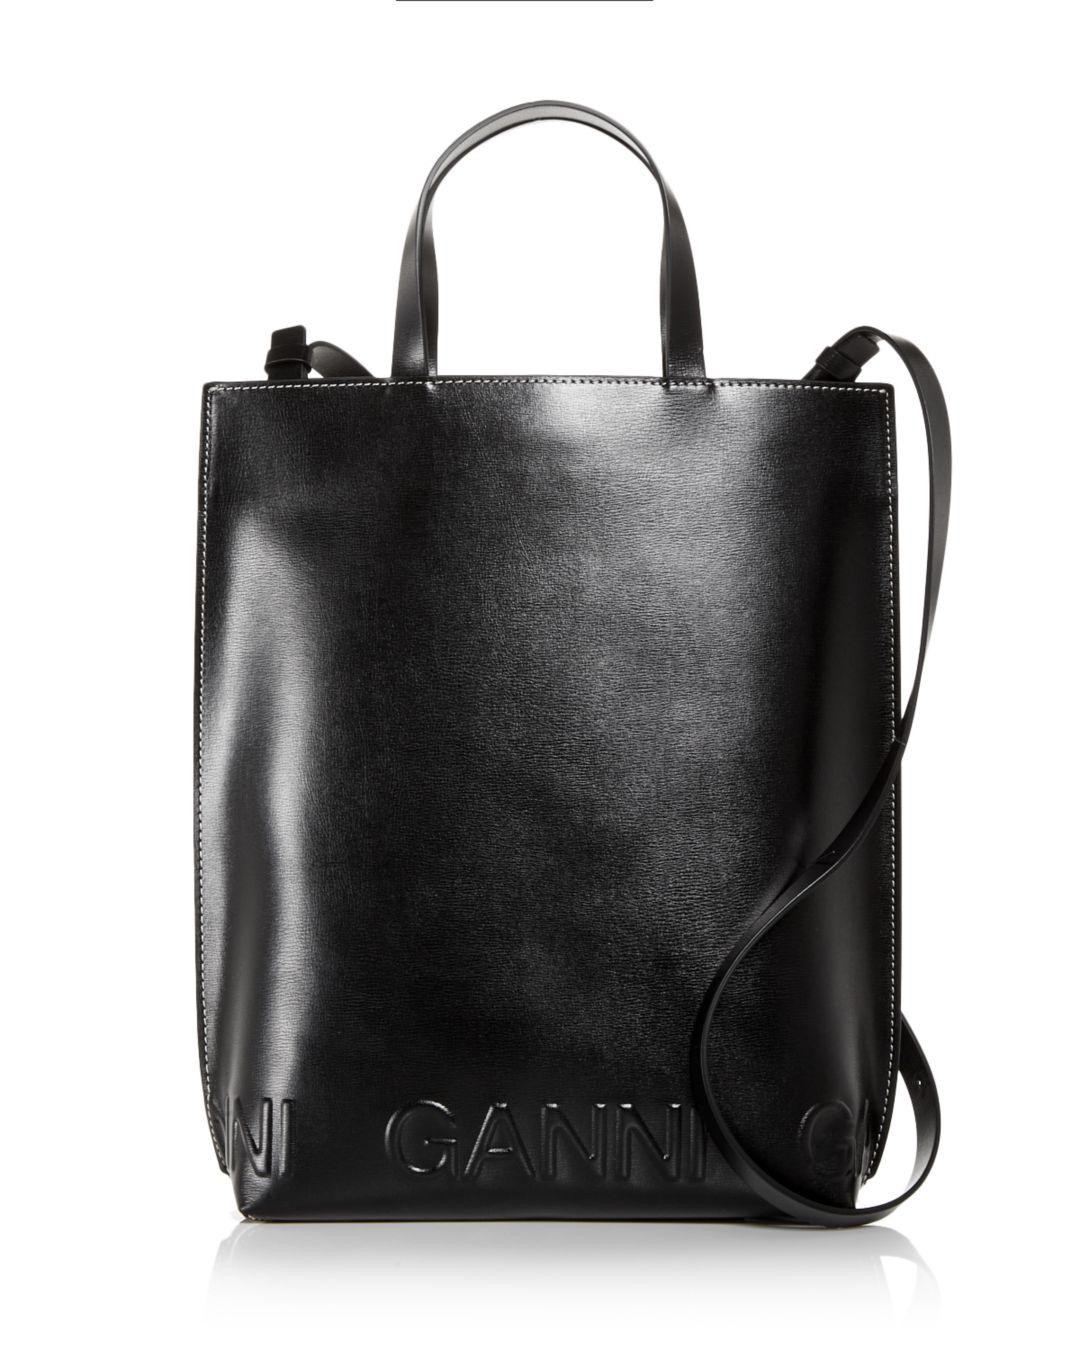 Ganni Banner Recycled Leather Medium Tote in Black - Lyst